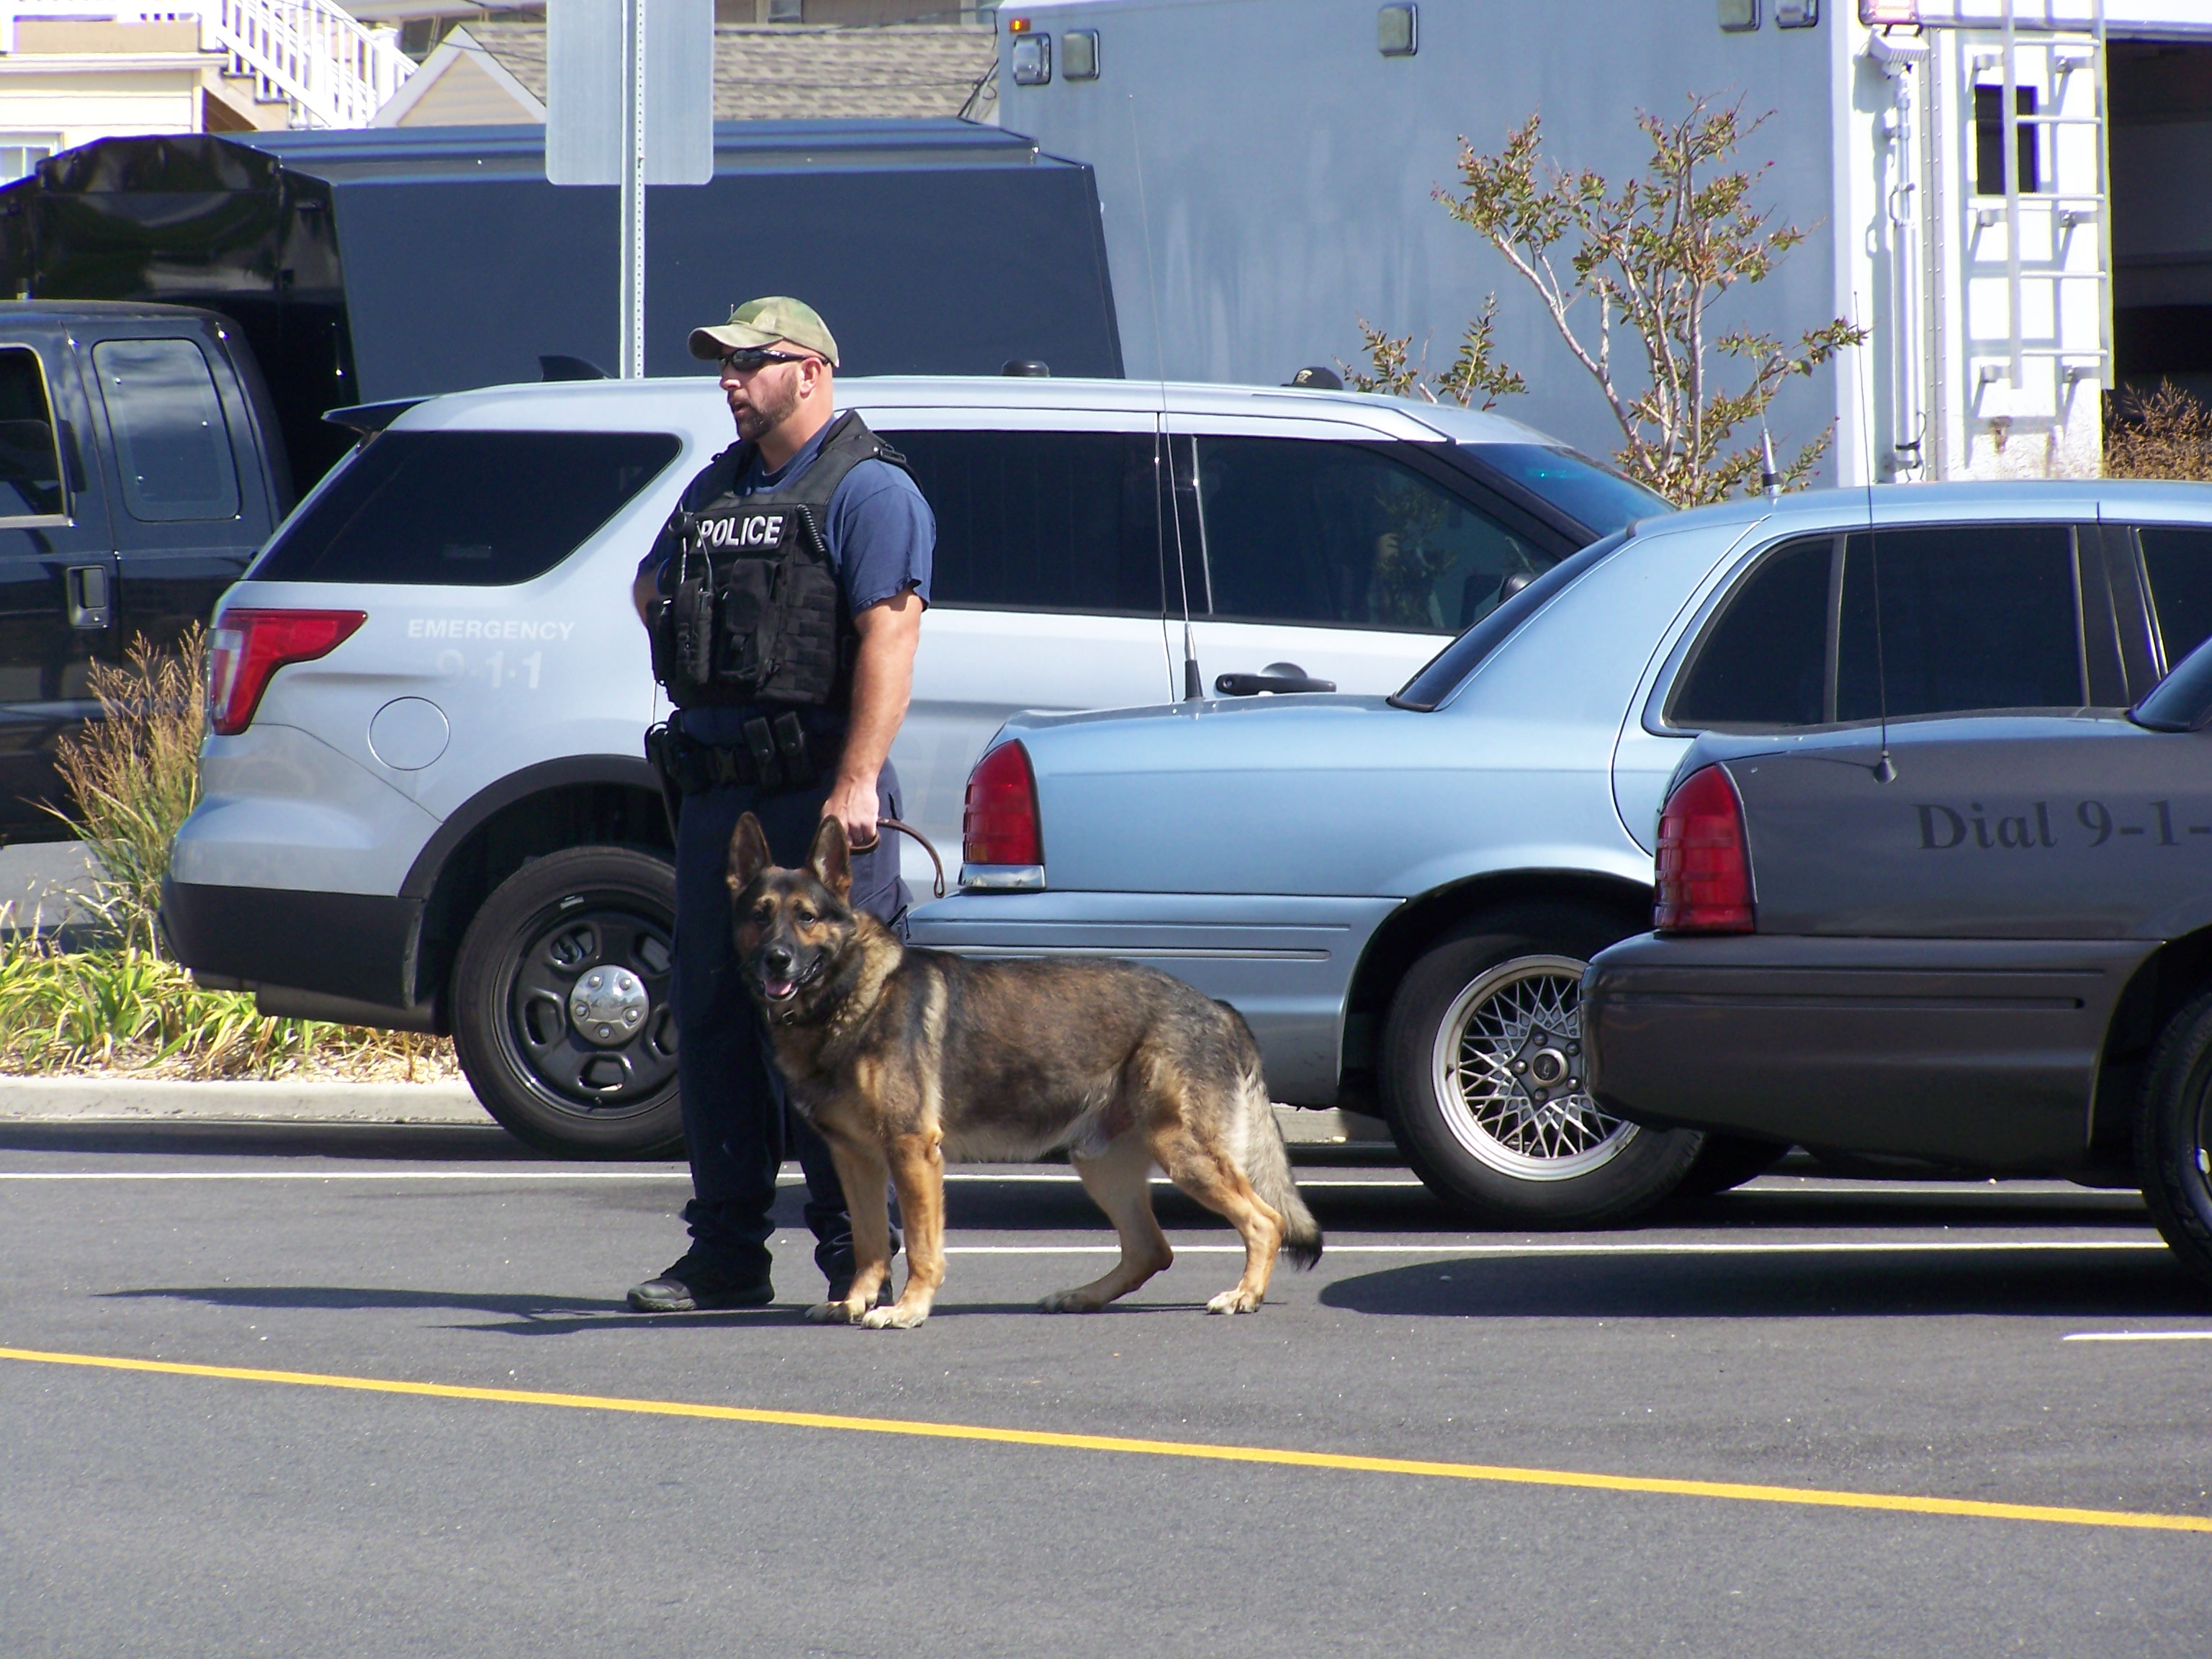 A police K9 in Seaside Park, following an explosion, Sept. 17, 2016. (Photo: Bob Vosseller)